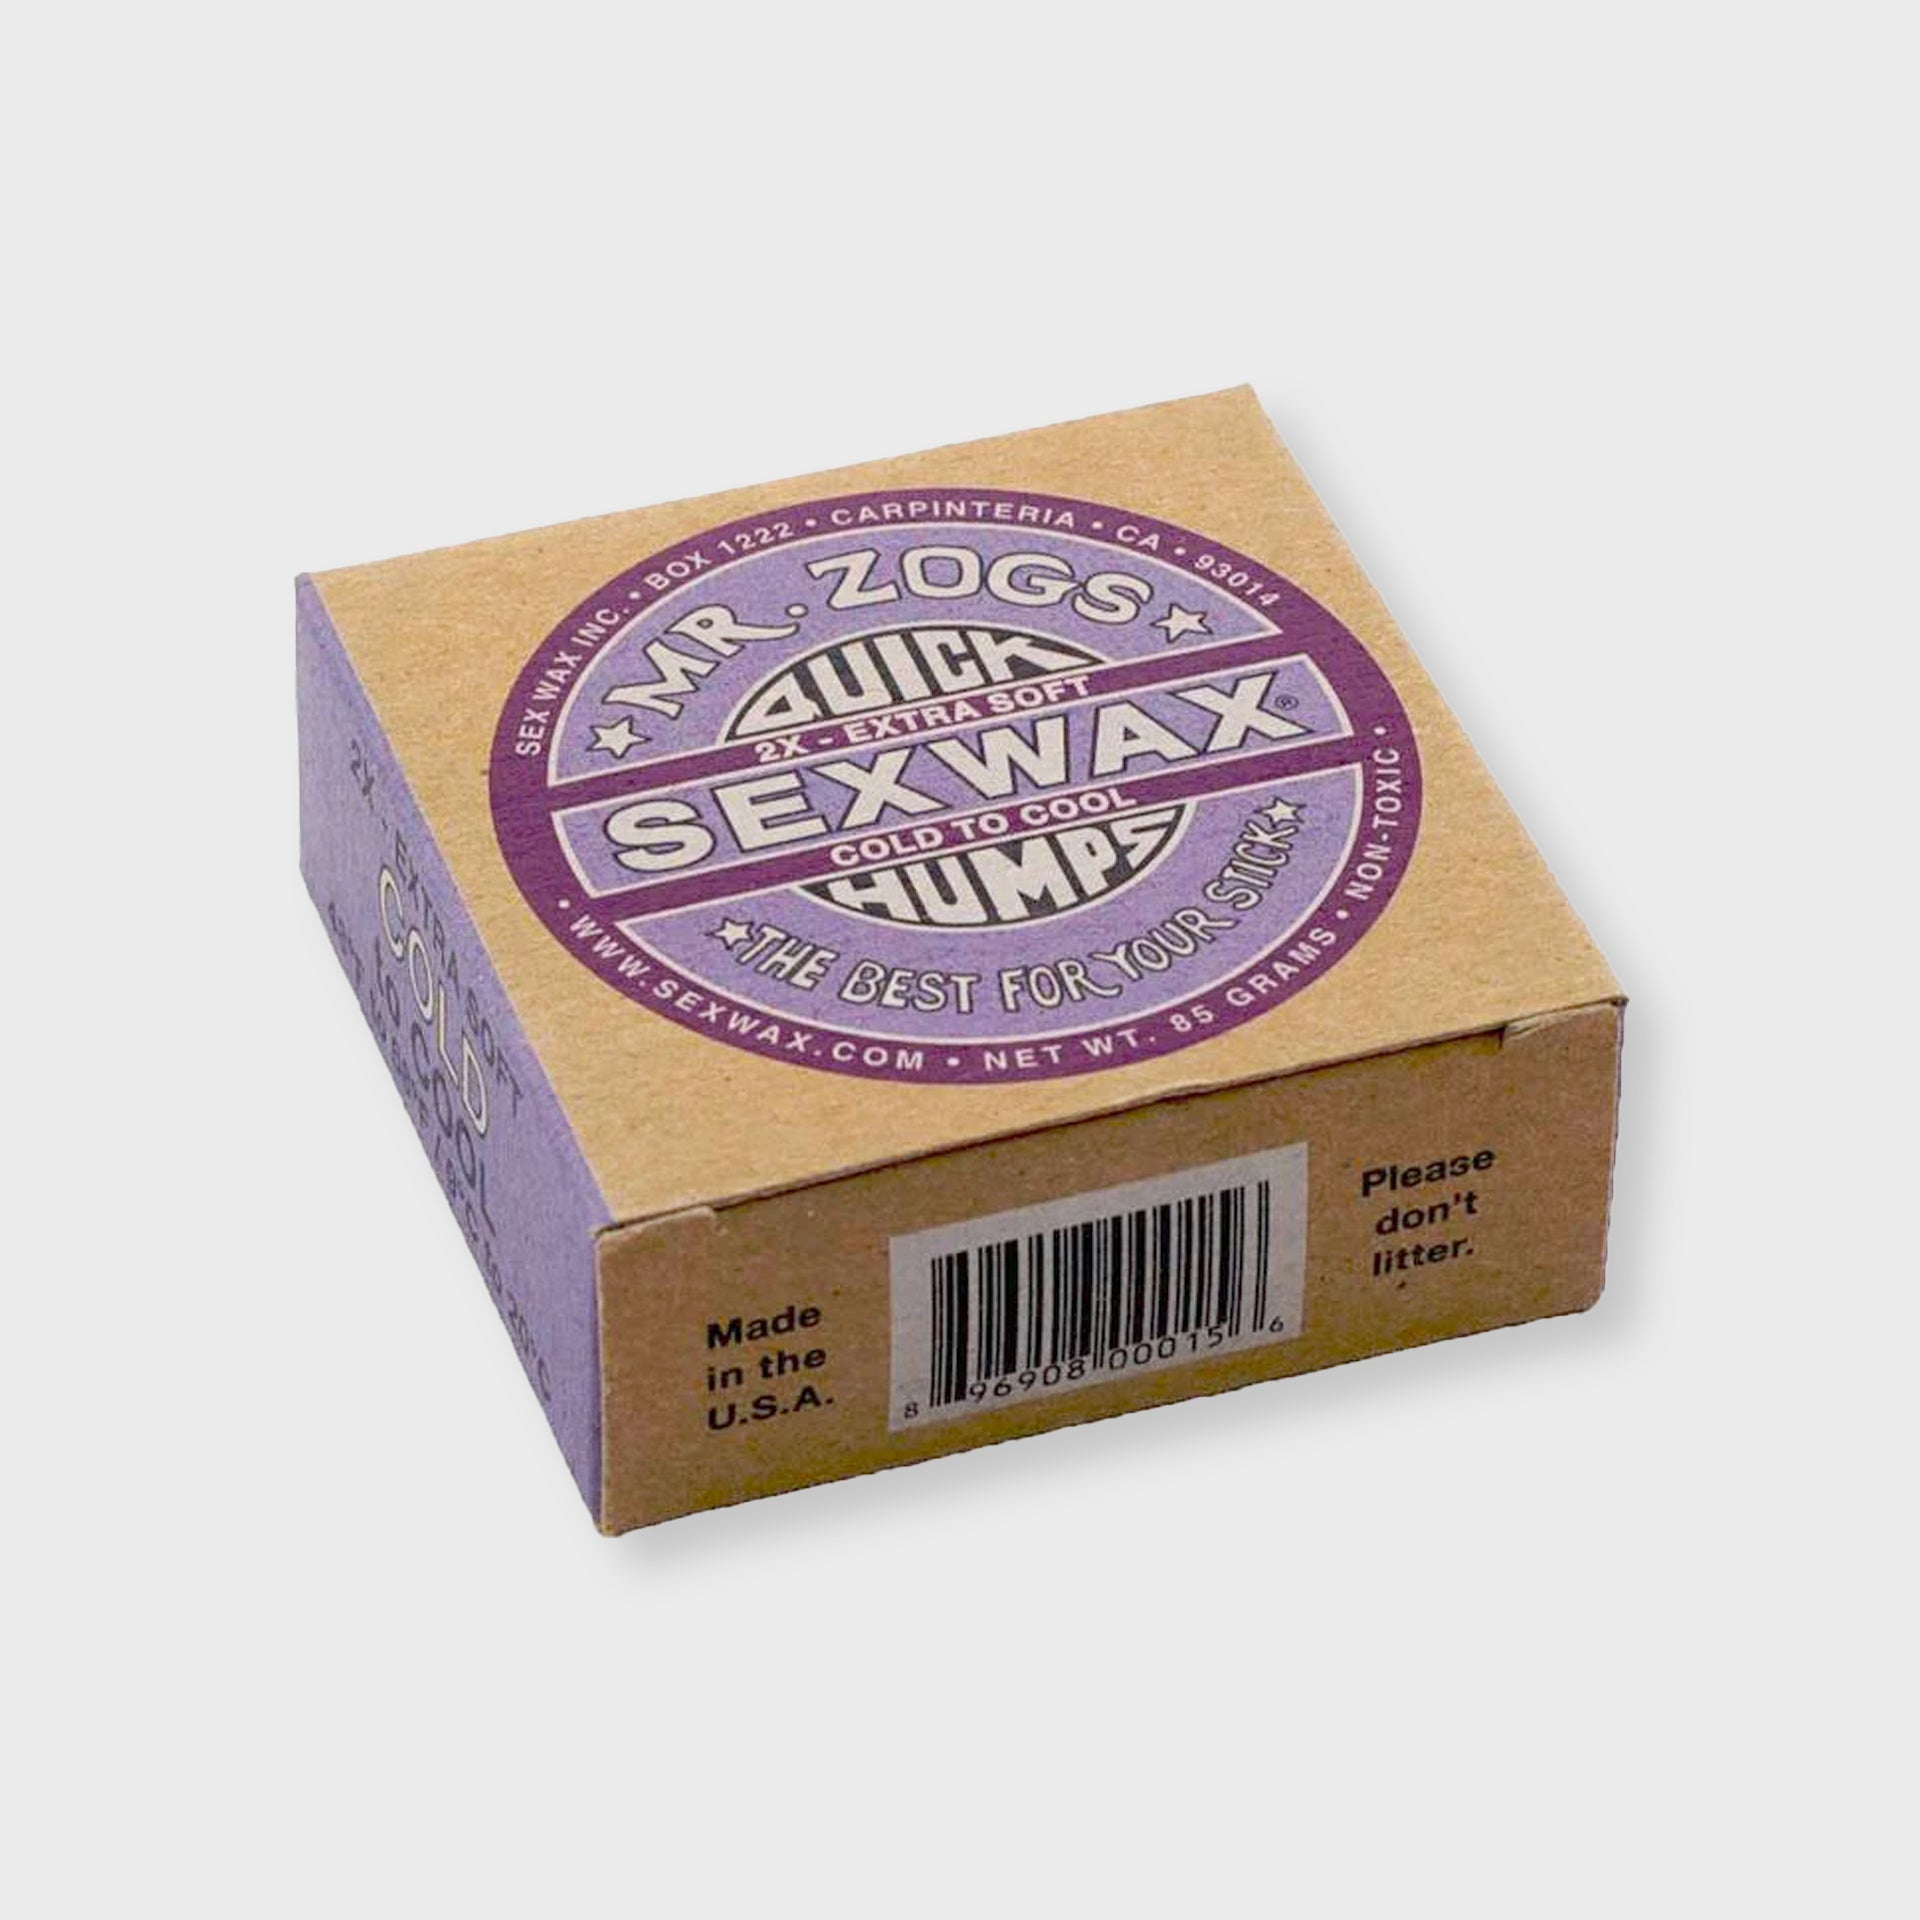 Sex Wax Quick Humps Surf Wax - Cold to Cool Water - ManGo Surfing